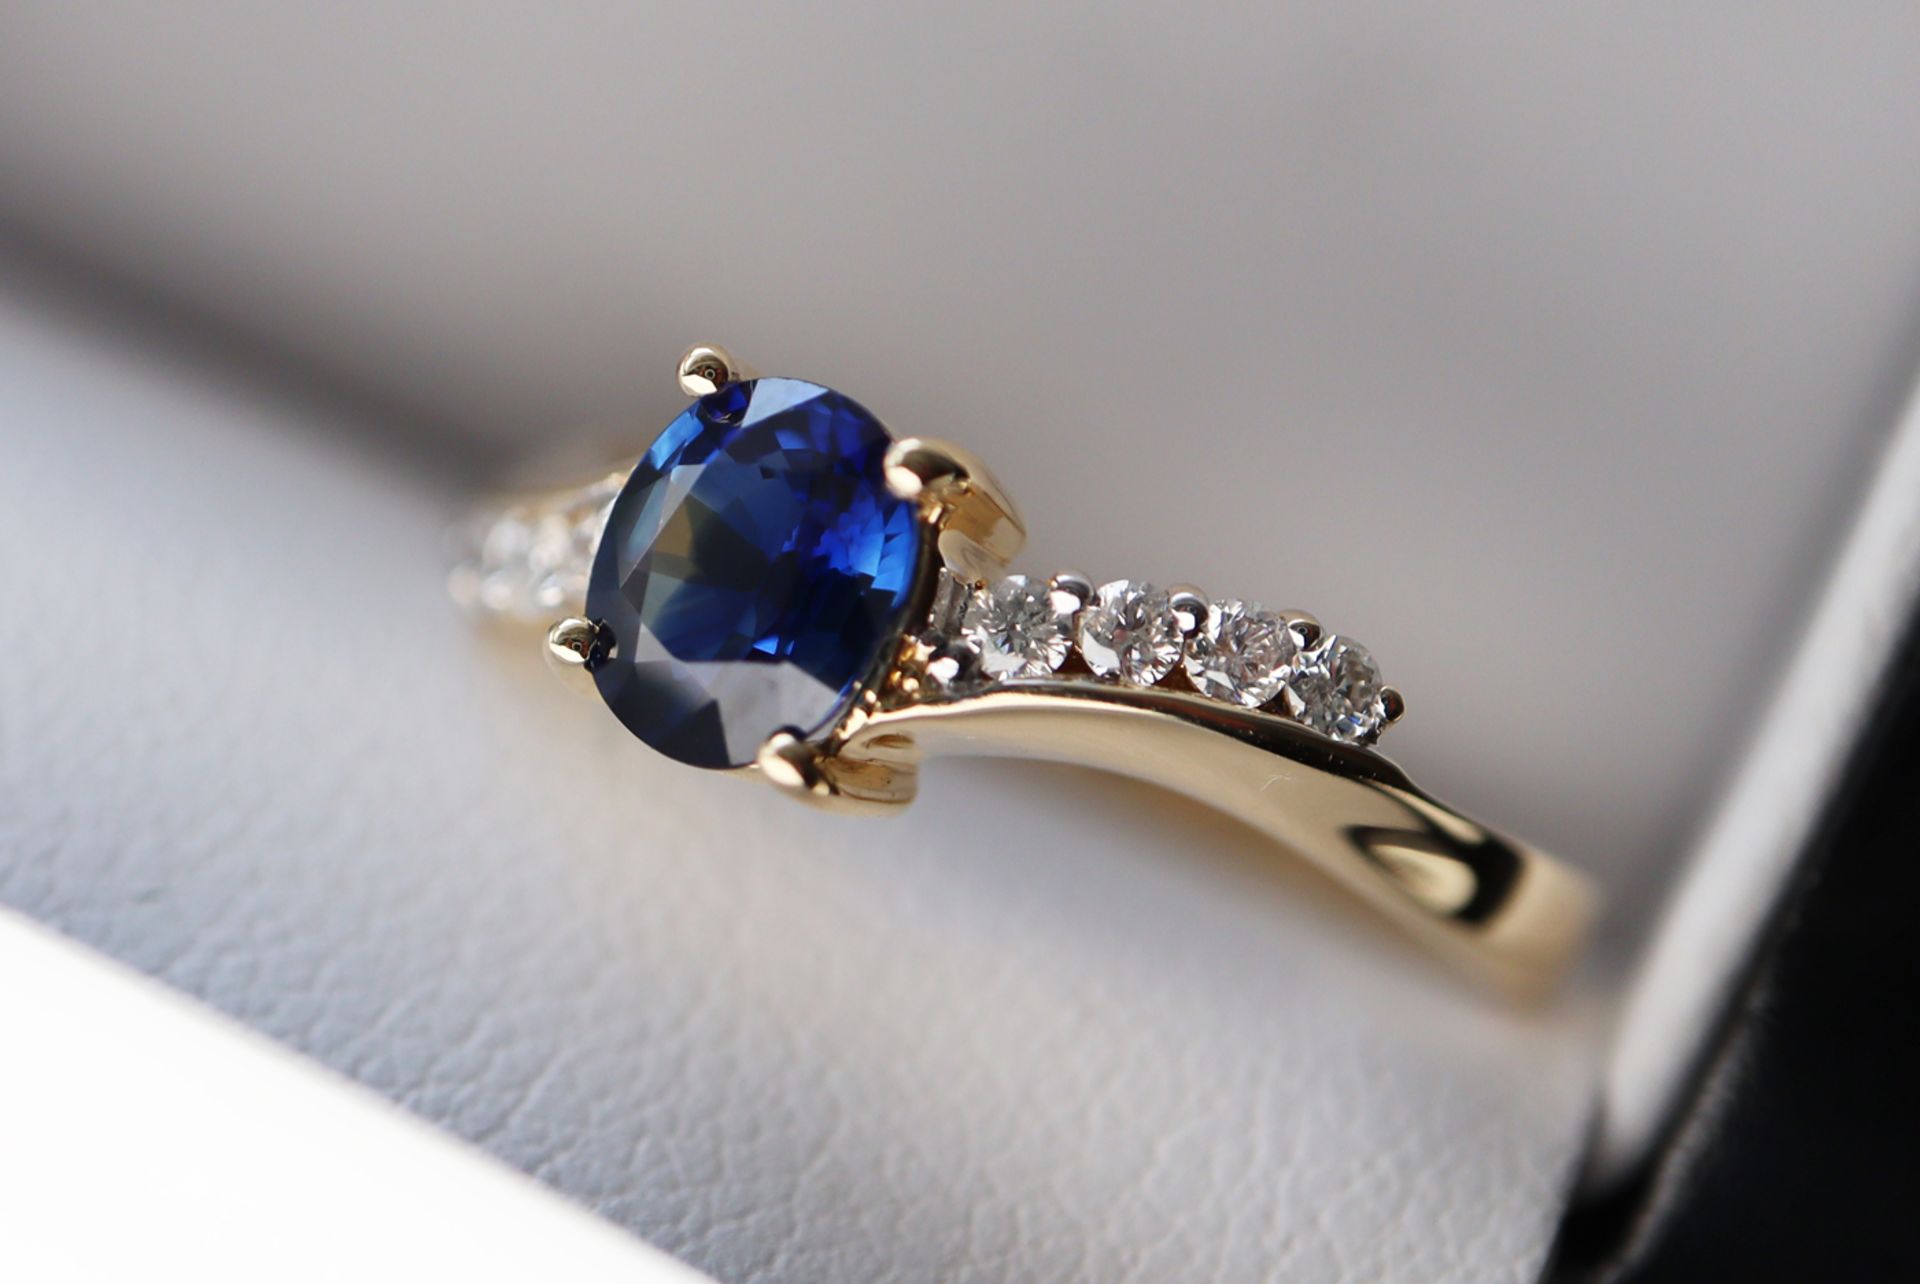 18K GOLD 0.77CT OVAL SAPPHIRE & DIAMOND RING - Image 3 of 8